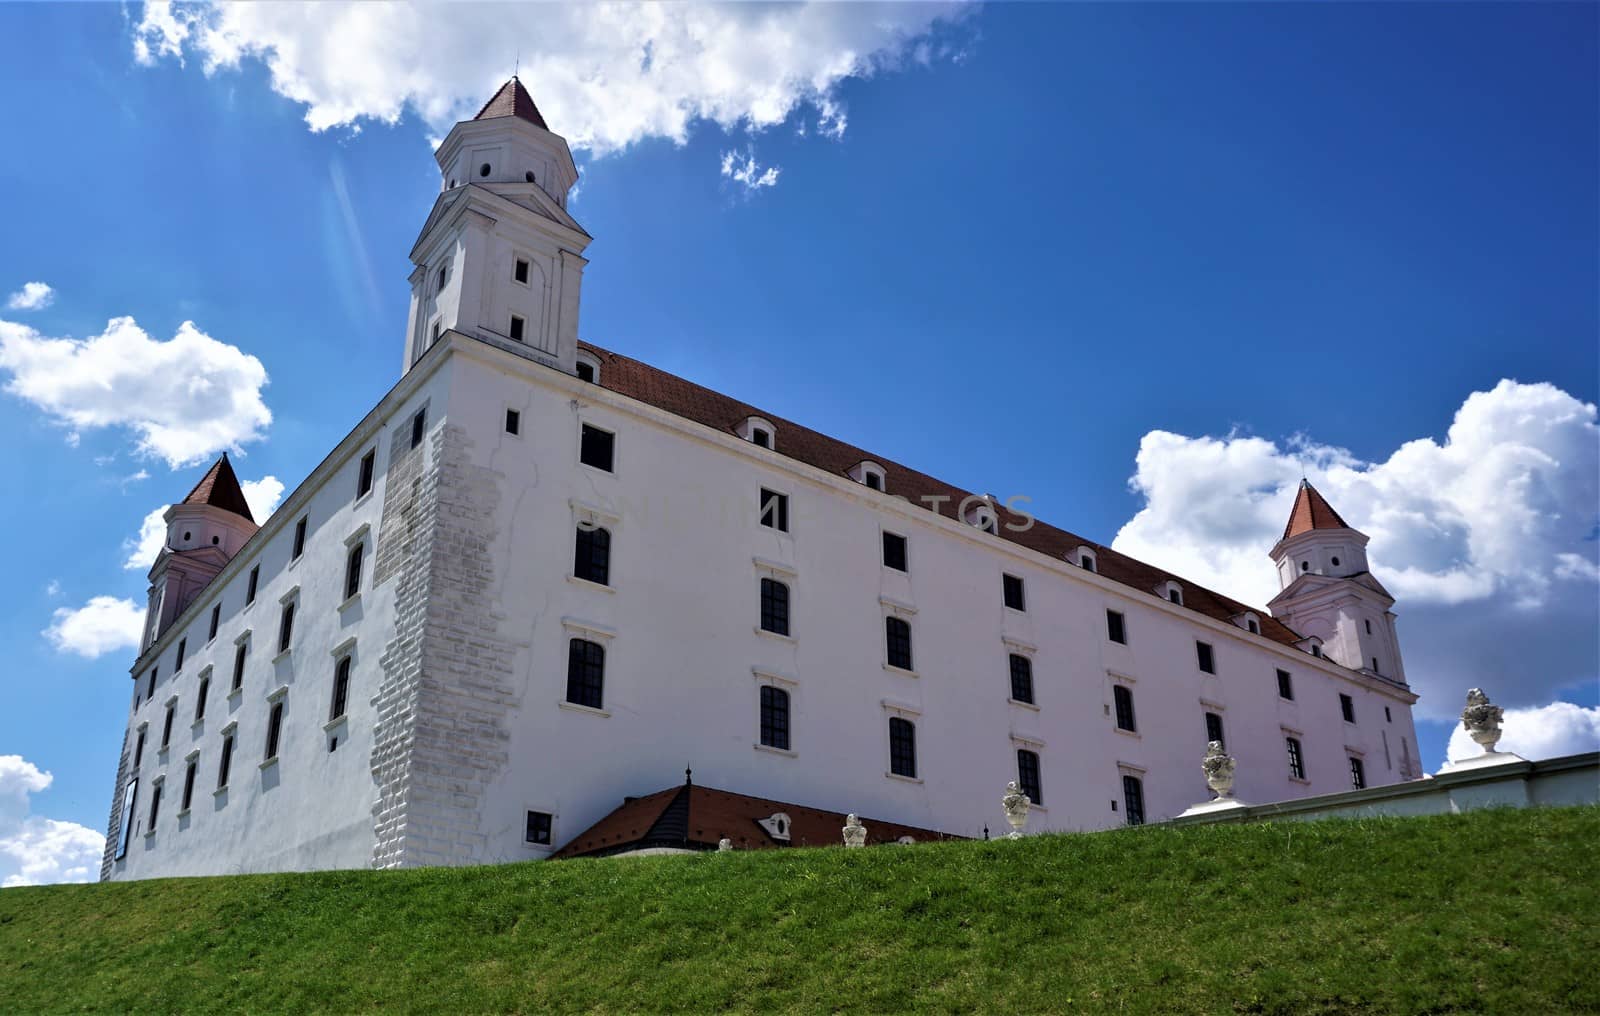 Bratislava castle, meadow and blue sky by pisces2386